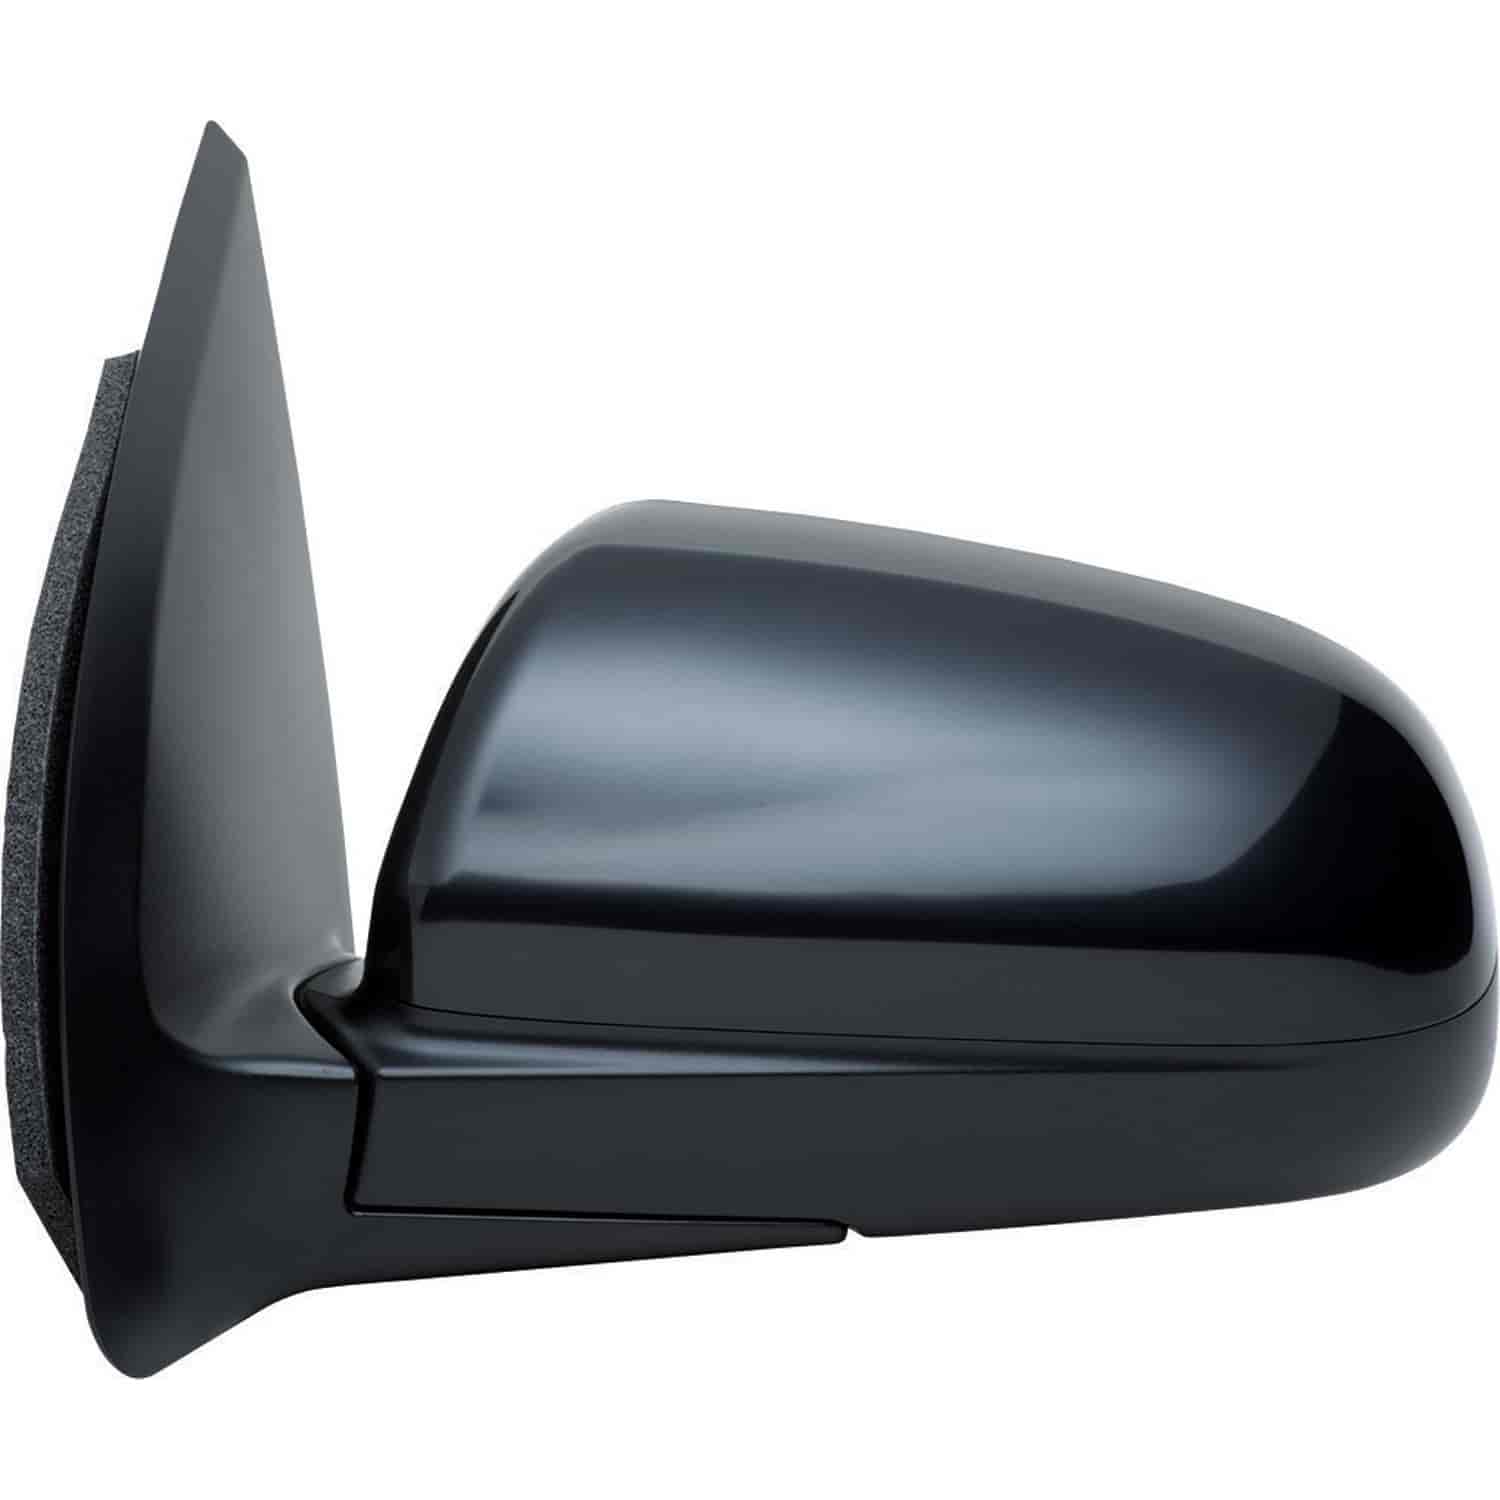 OEM Style Replacement mirror for 07-11 Chevy Aveo Sedan driver side mirror tested to fit and functio